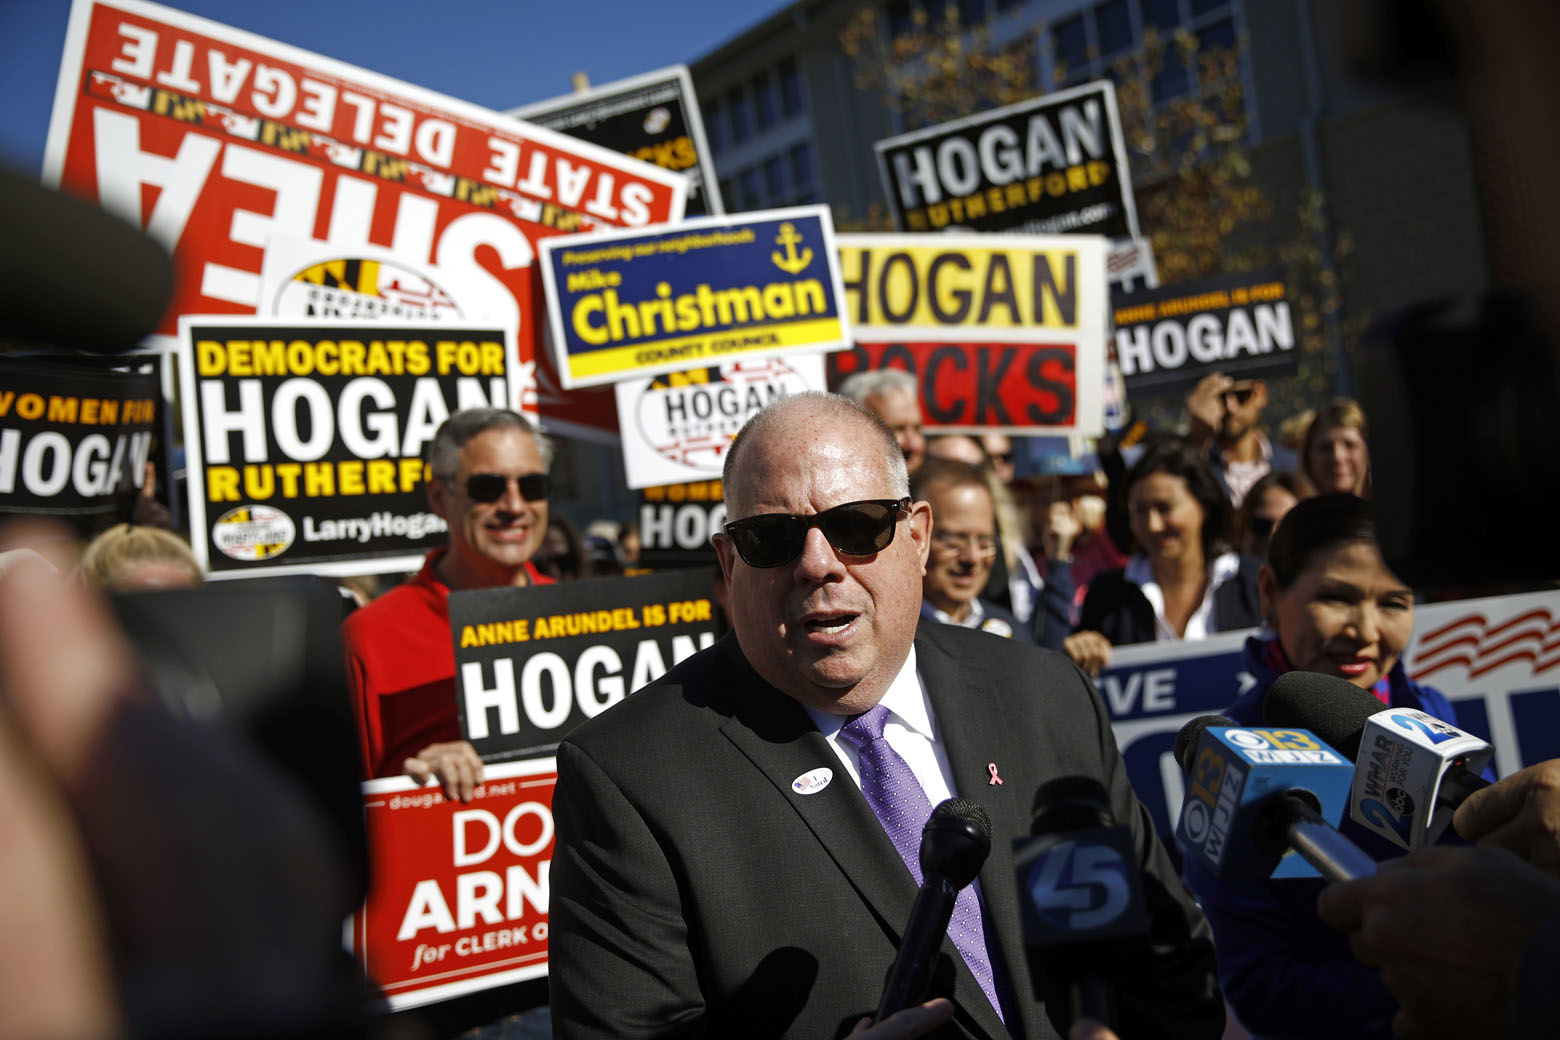 Maryland Gov. Larry Hogan speaks with the news media outside a polling place after voting early, Tuesday, Oct. 30, 2018, in Annapolis, Md. Hogan is running for re-election against Democratic candidate Ben Jealous. (AP Photo/Patrick Semansky)